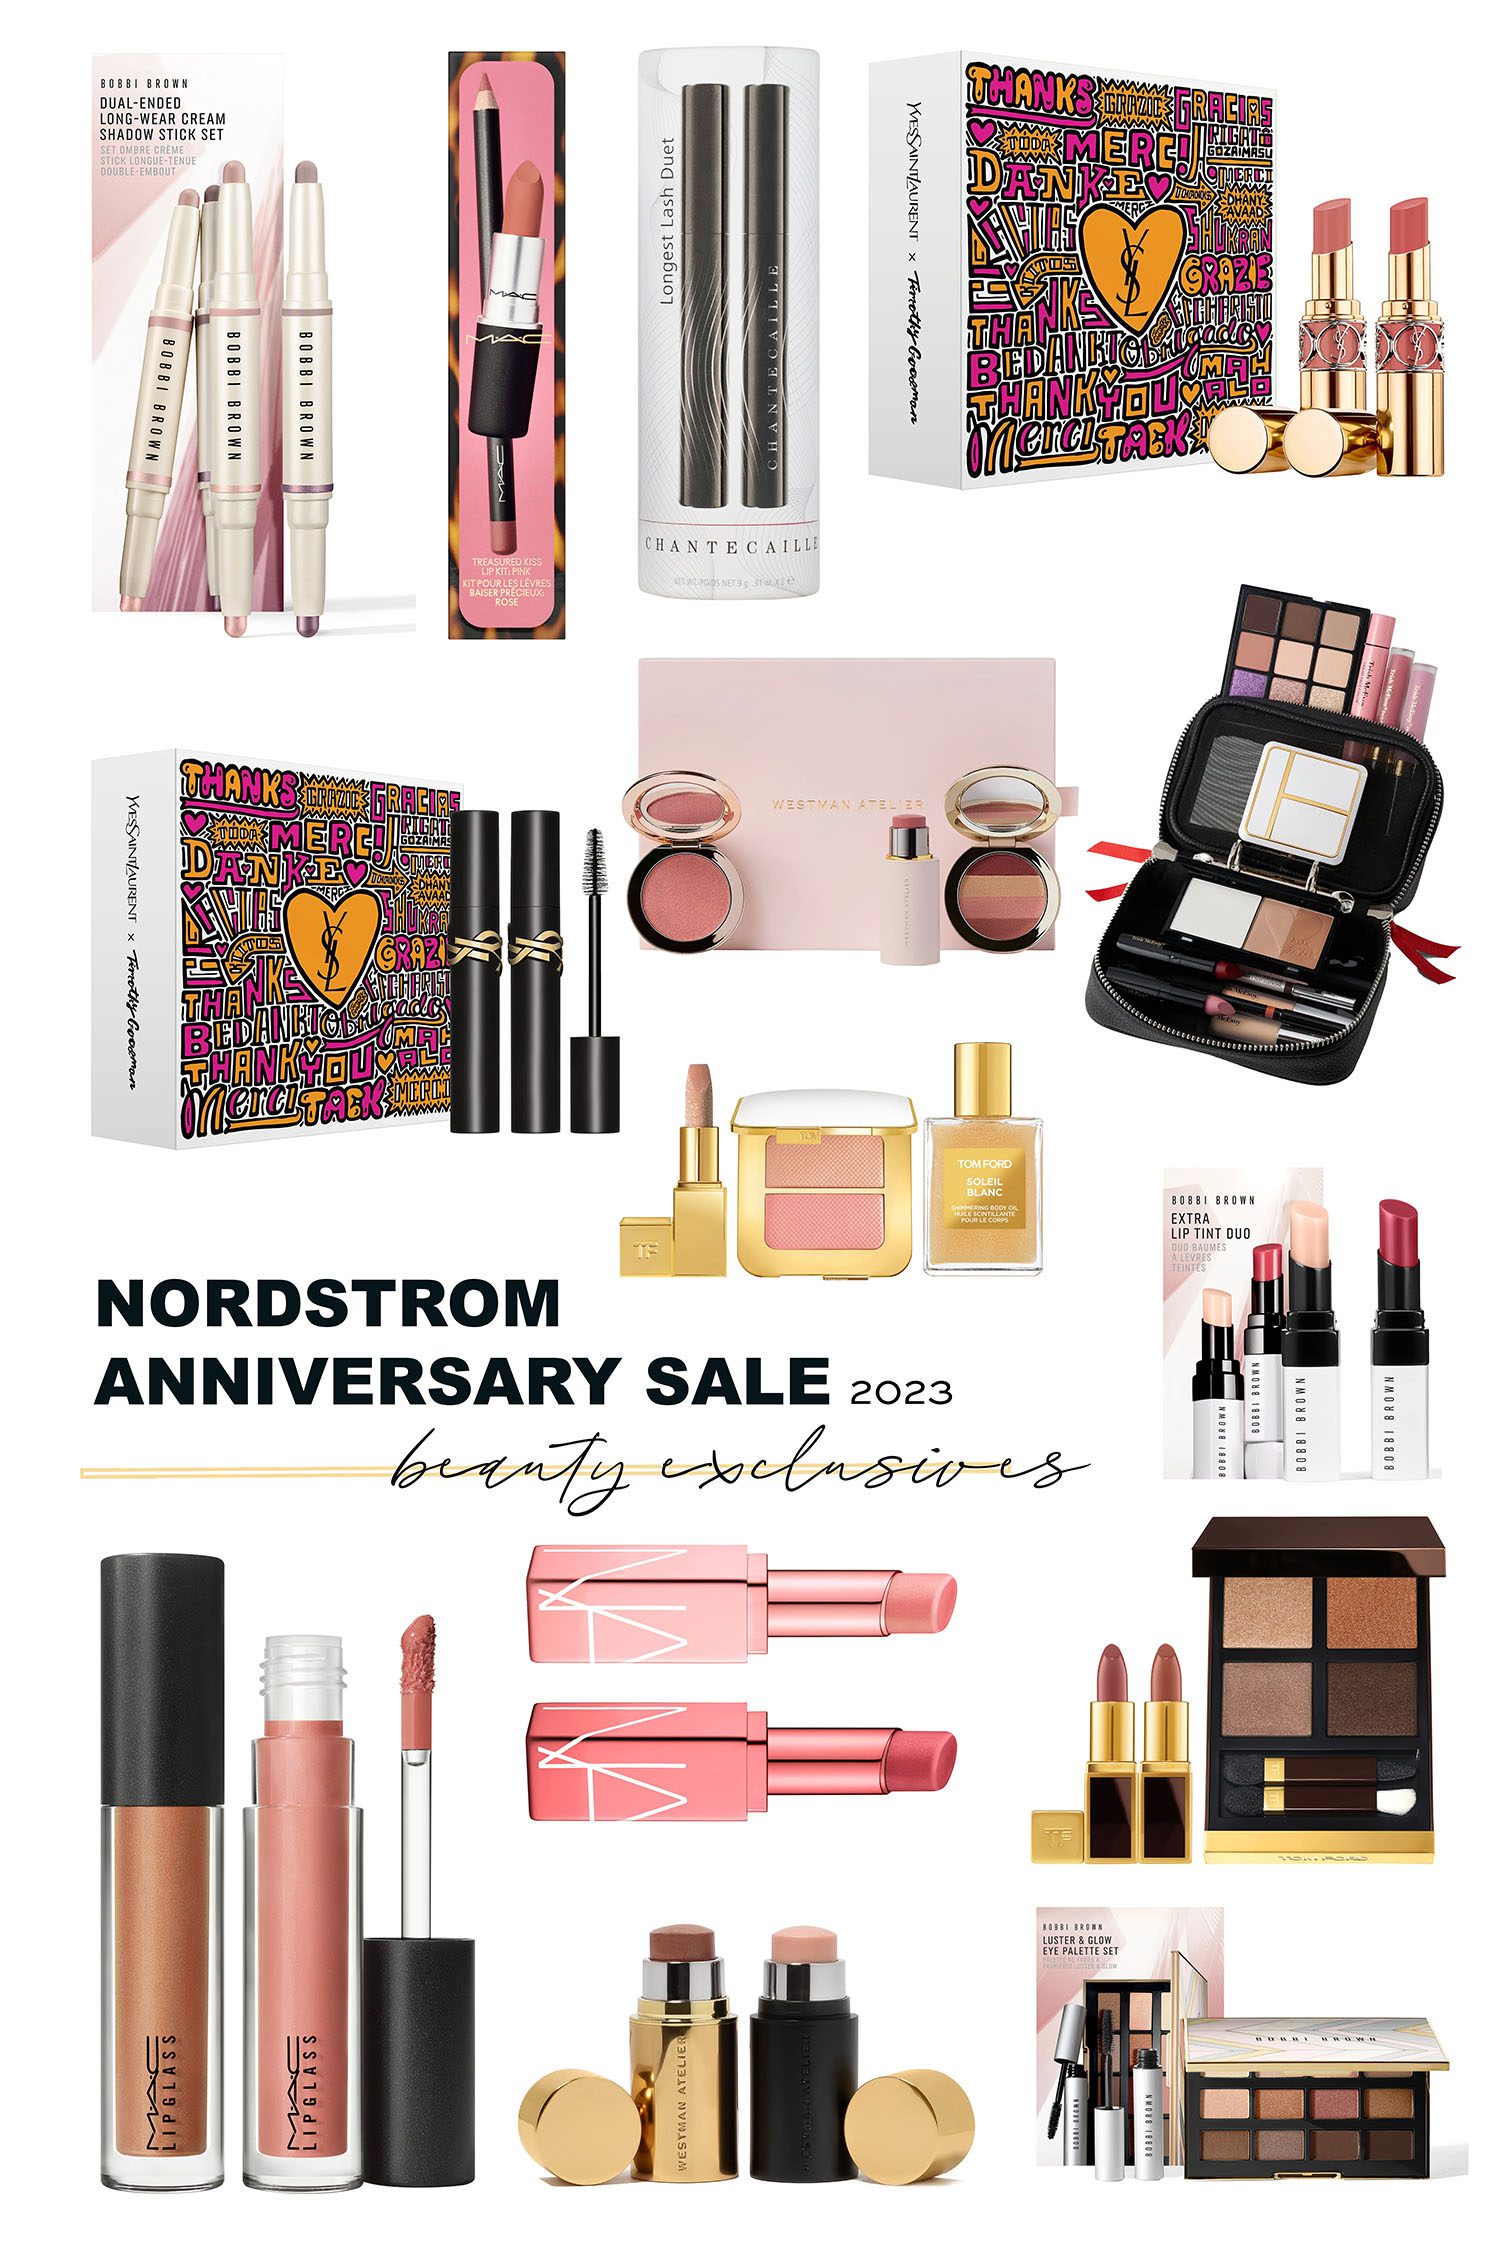 Nordstrom Anniversary Sale 2023: dates, preview and early deals